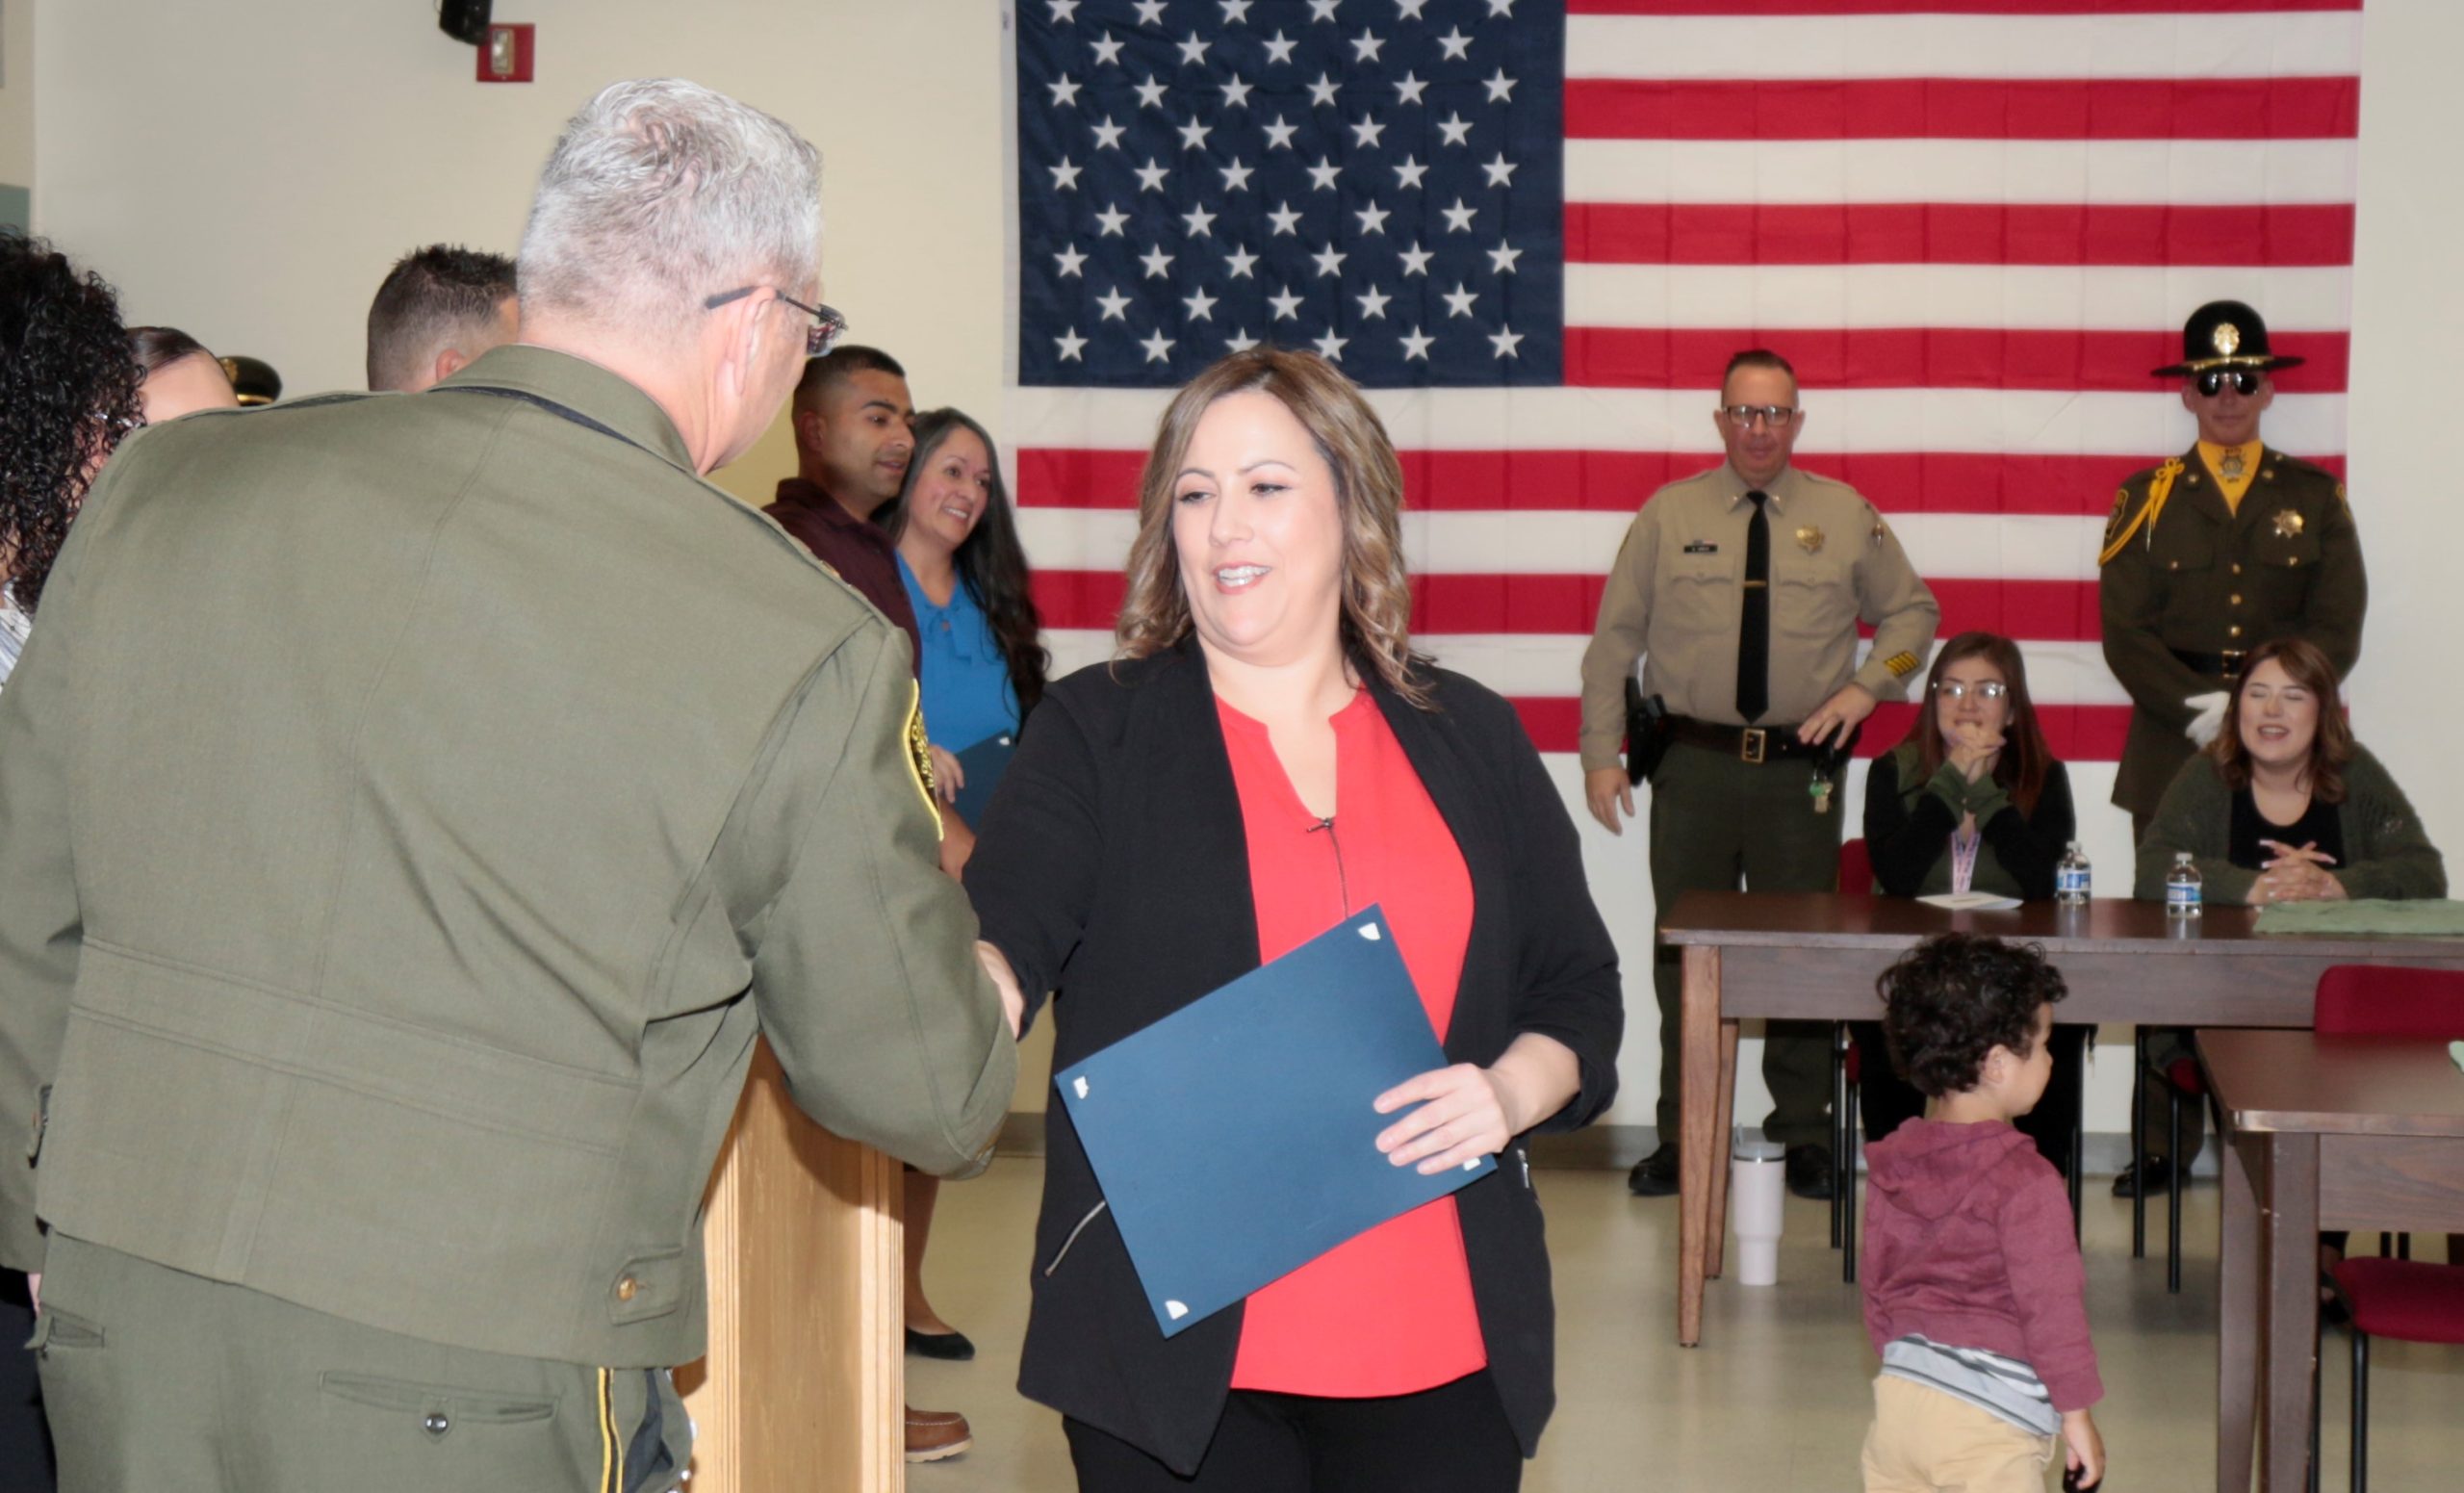 SATF warden shakes hands during a promotion ceremony. The American flag can be seen in the background.